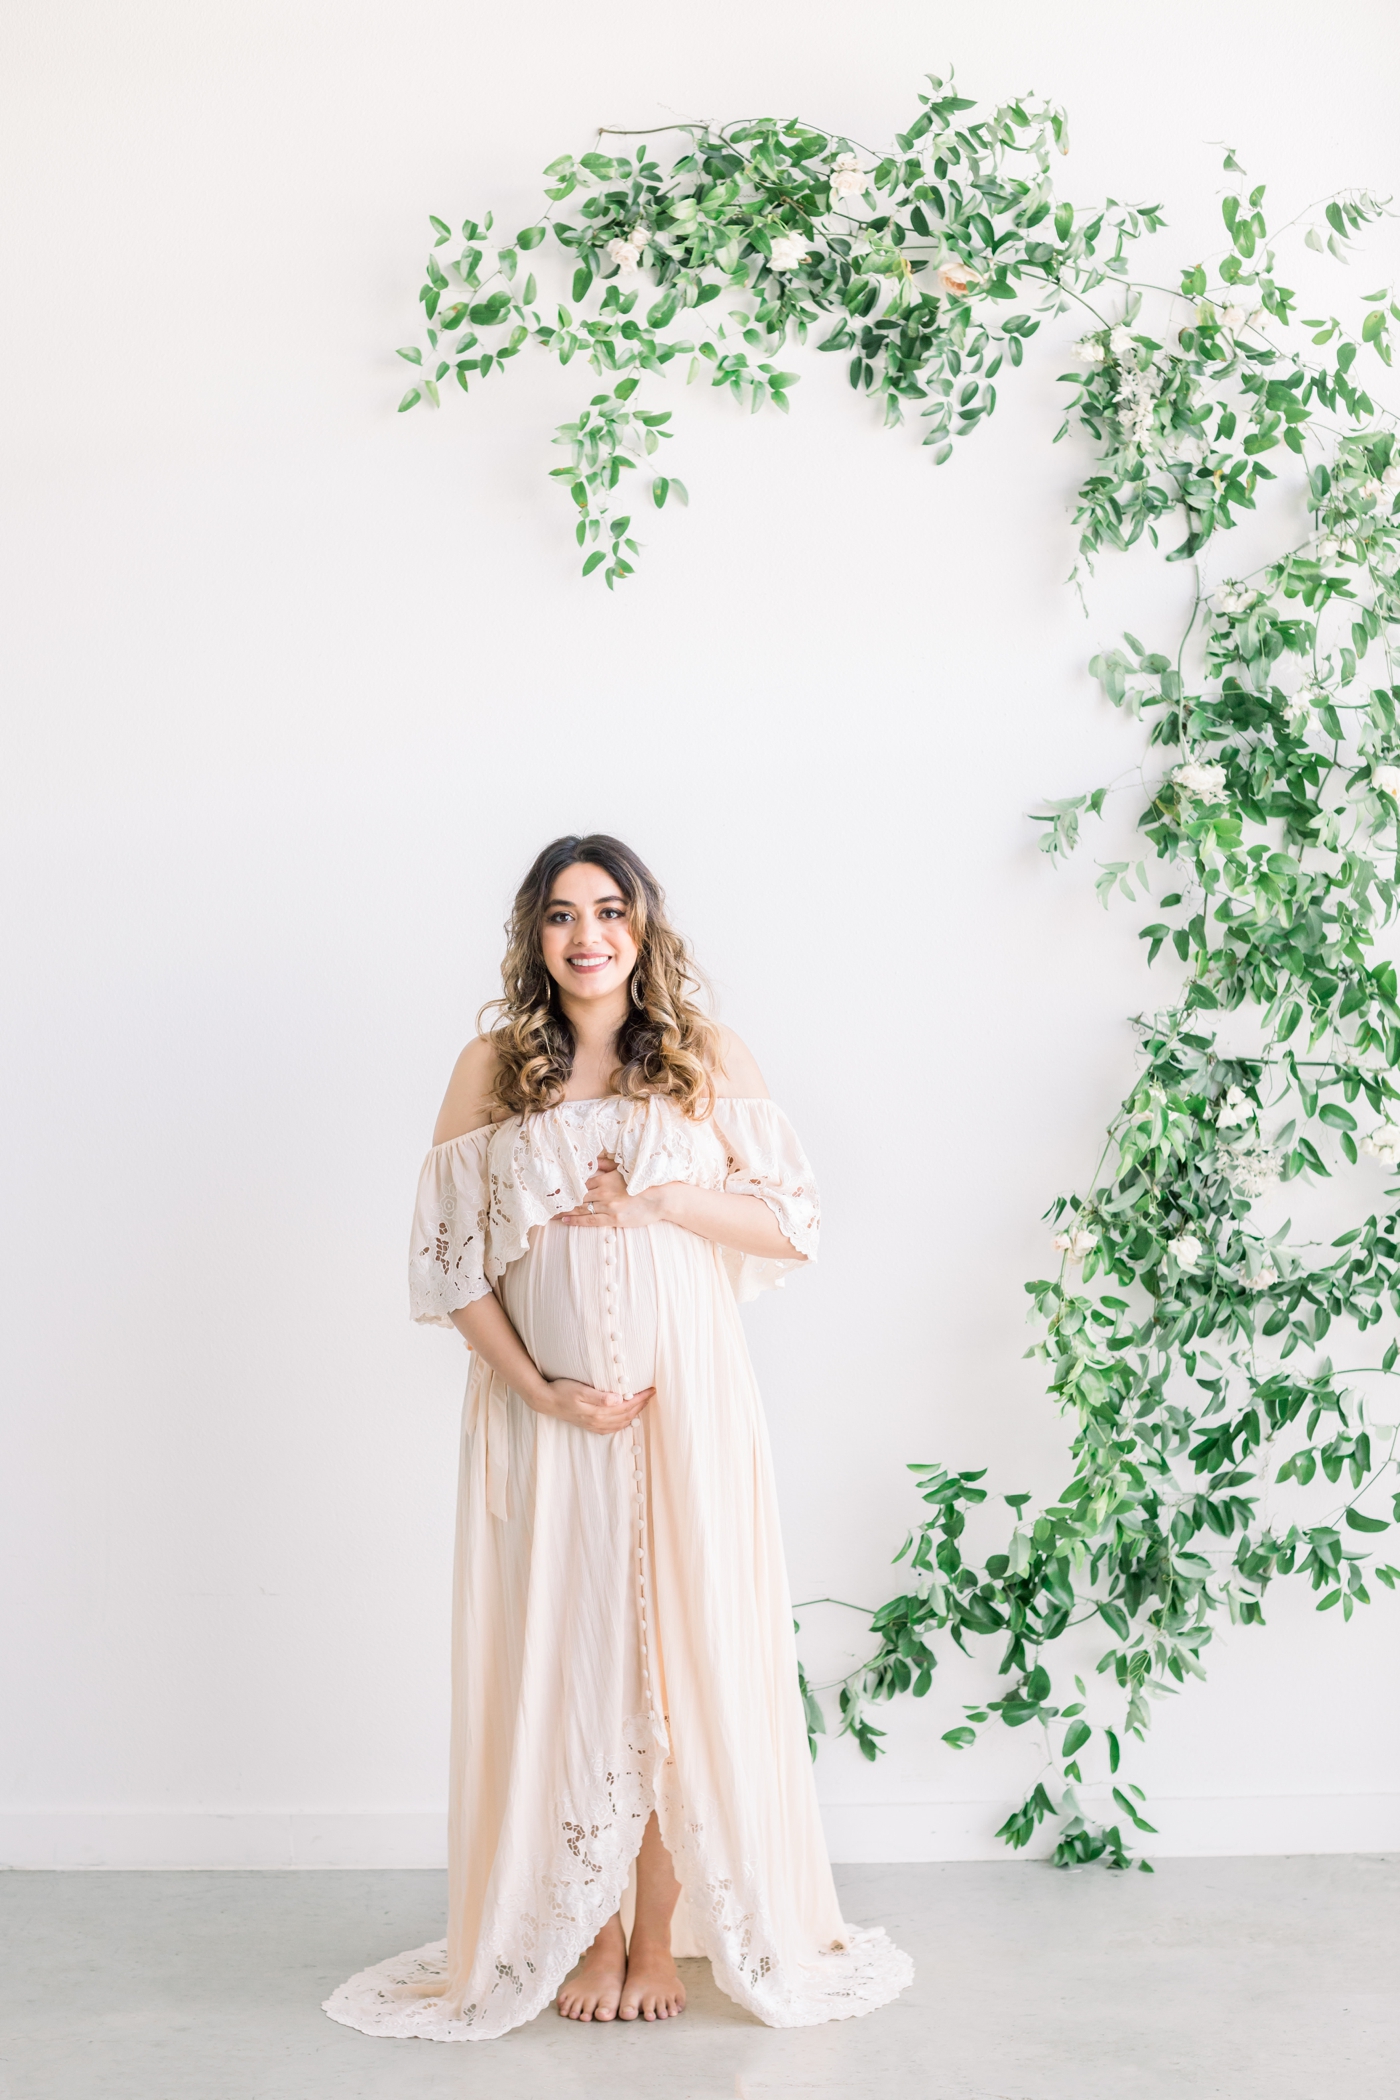 Maternity portrait of mom wearing maxi dress in North Austin, TX studio. Photo by Sana Ahmed Photography.